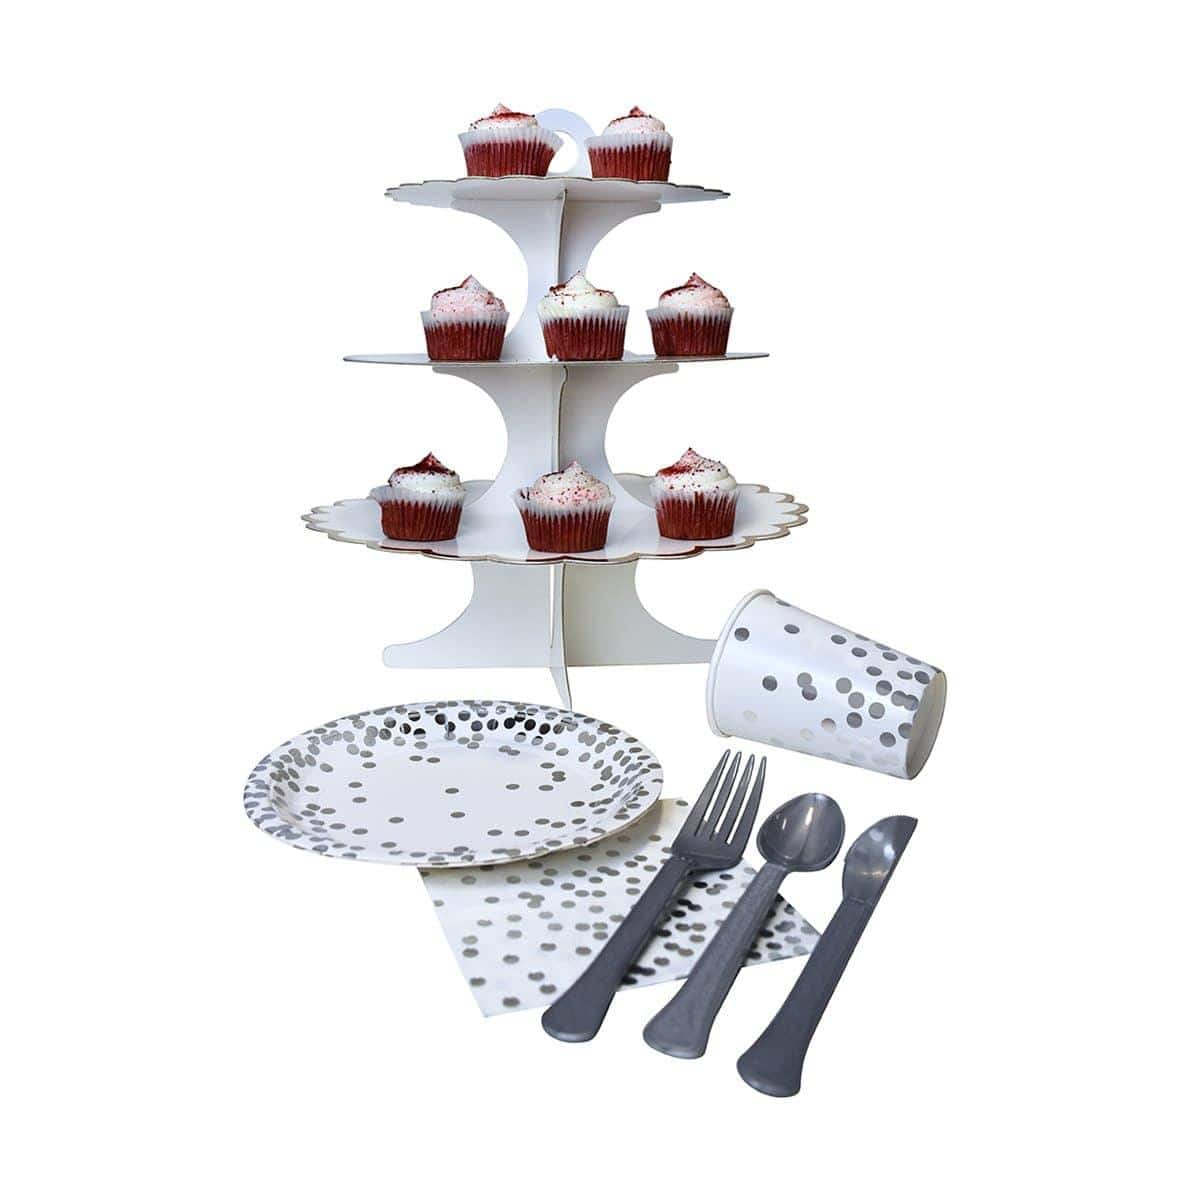 Cupcake Stand 3 Tiers - Metallic Silver